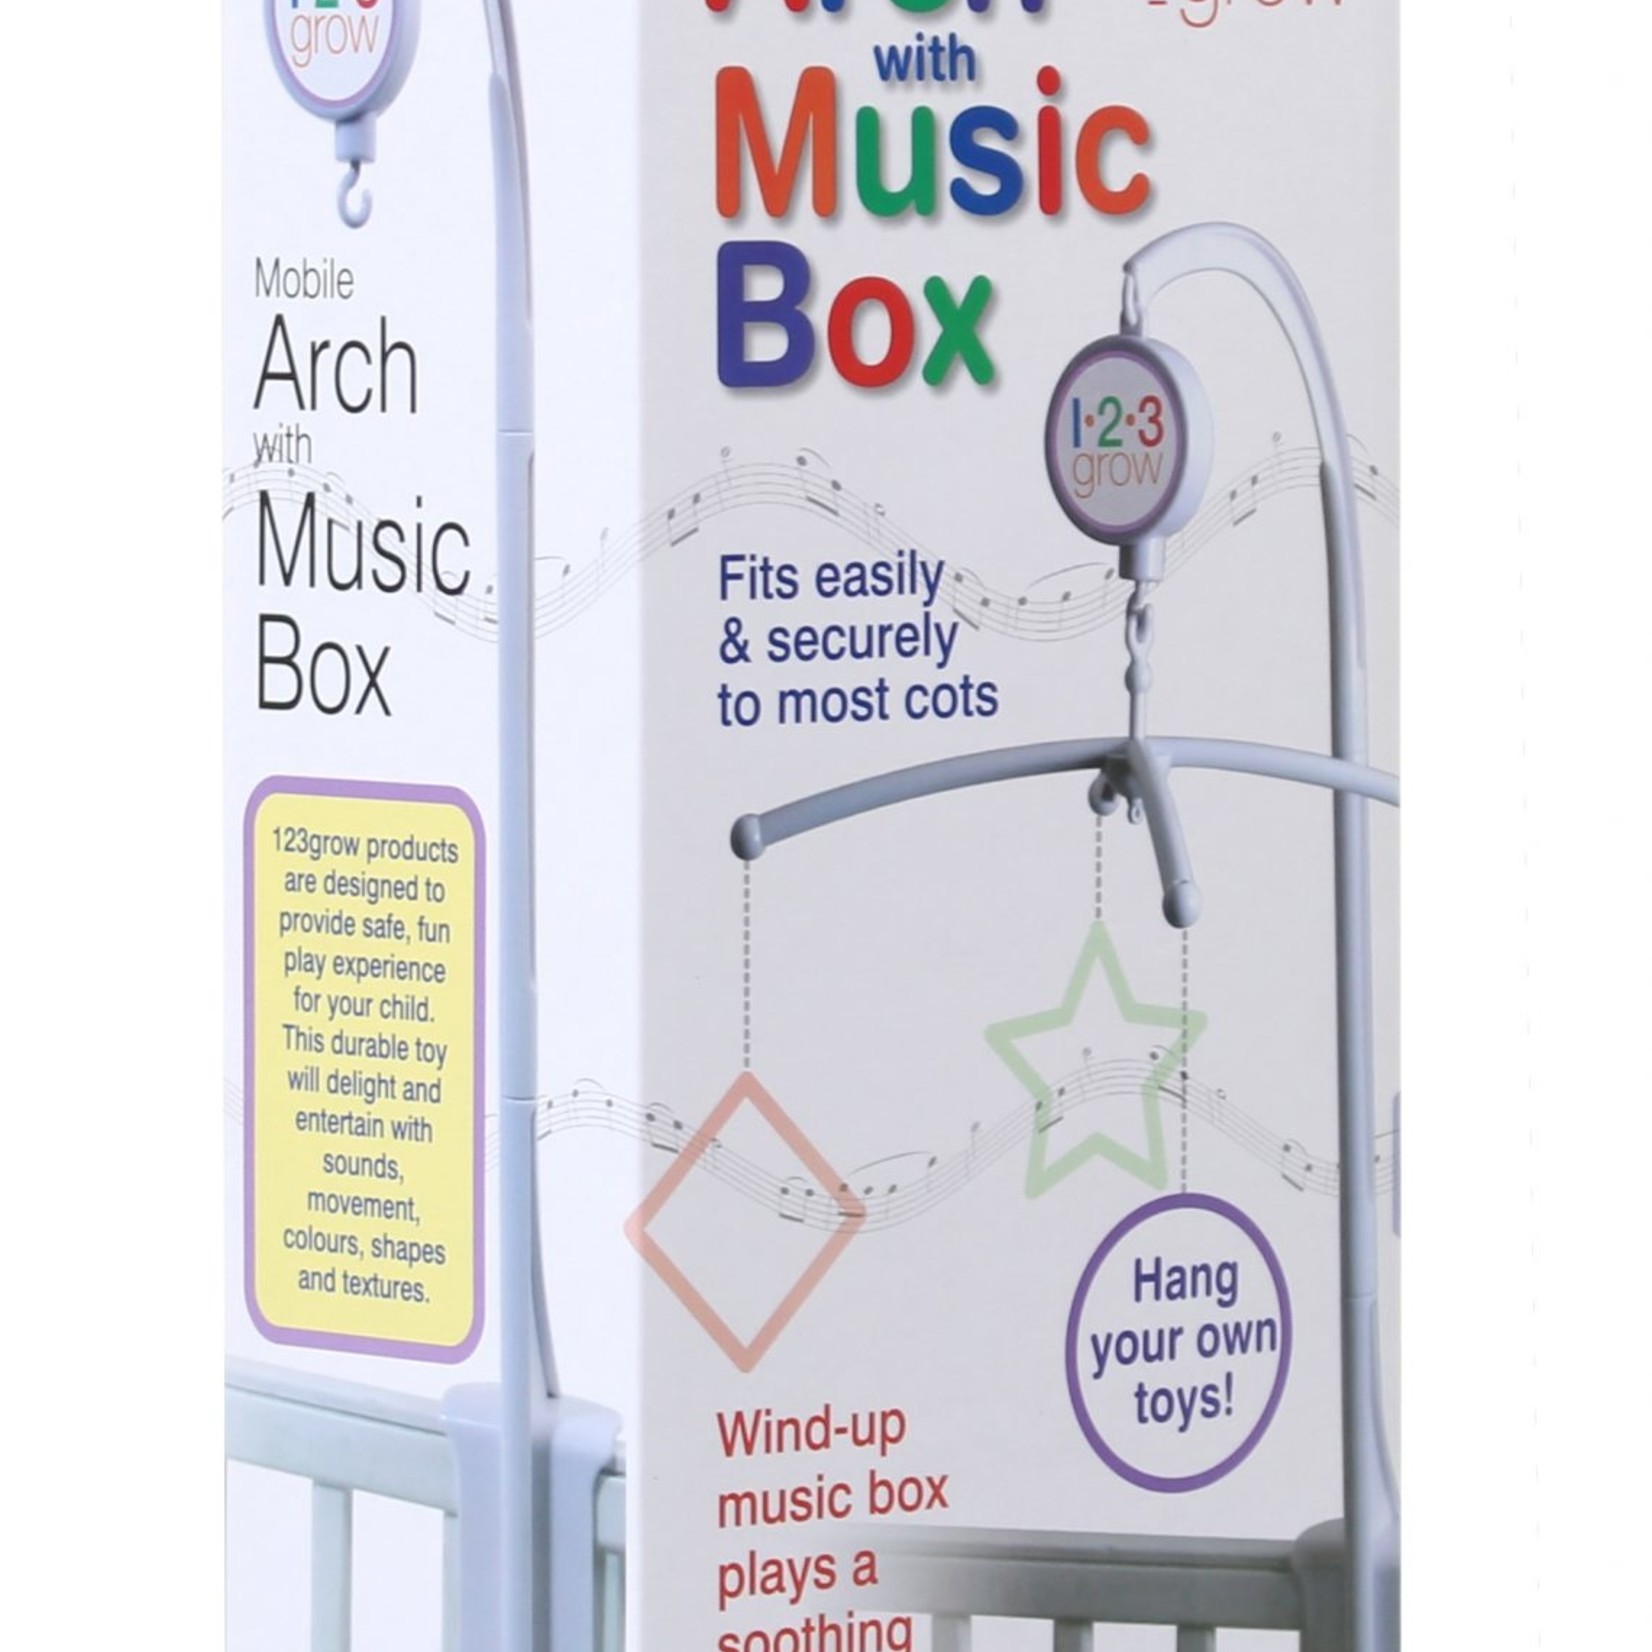 123 GROW Mobile Arch with music box